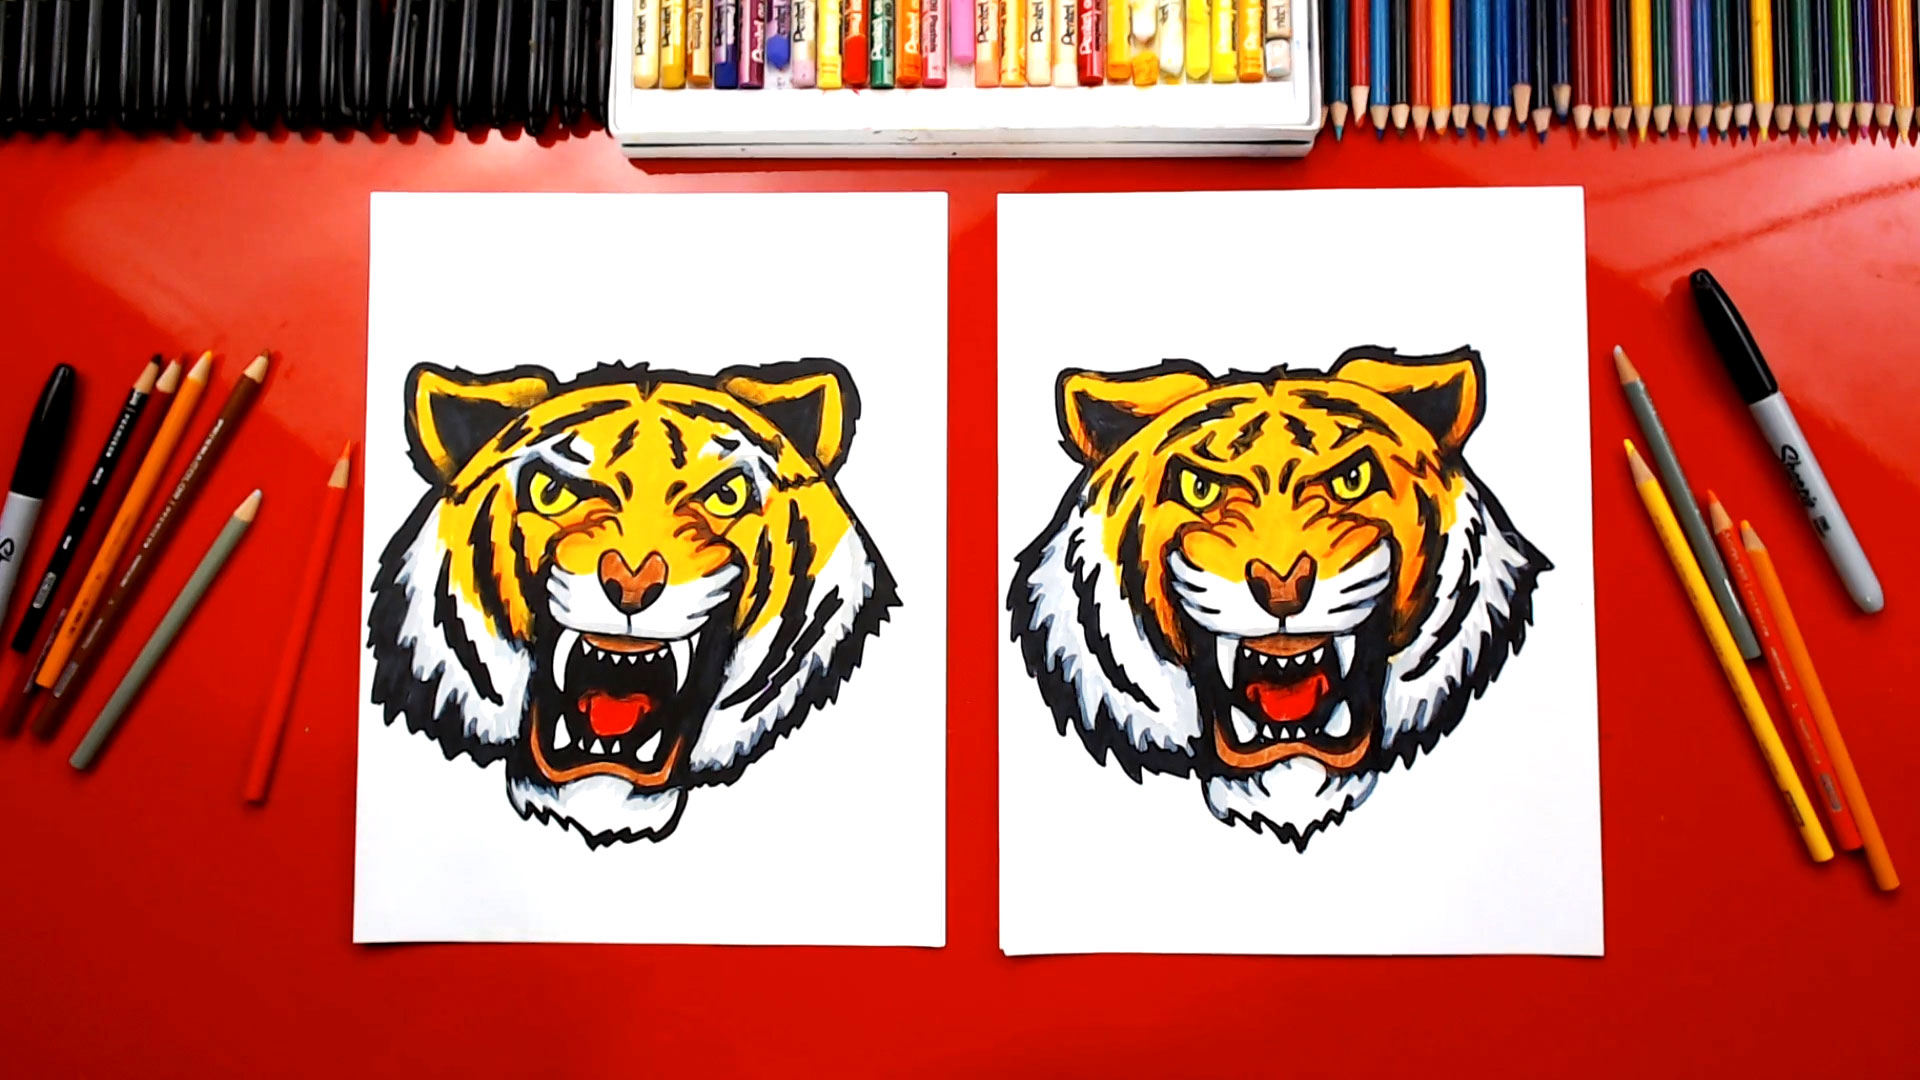 Tigers Drawings For Kids